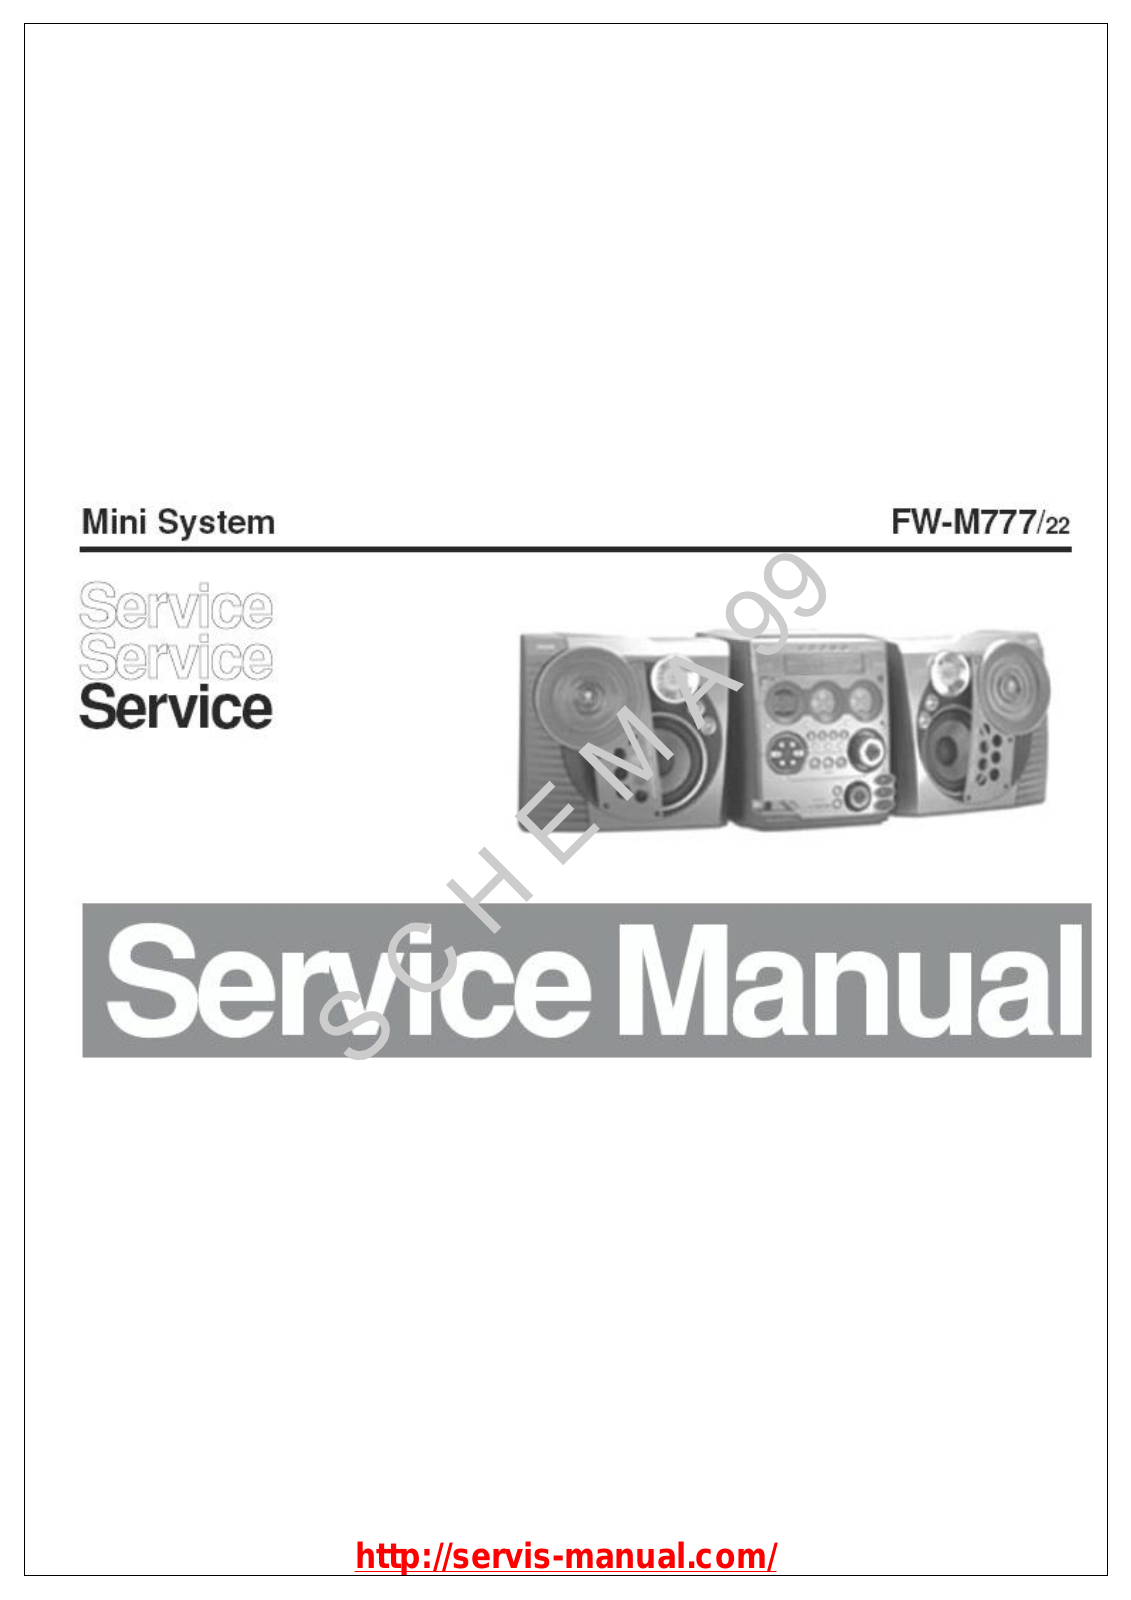 Philips FW M777V22 Service Manual